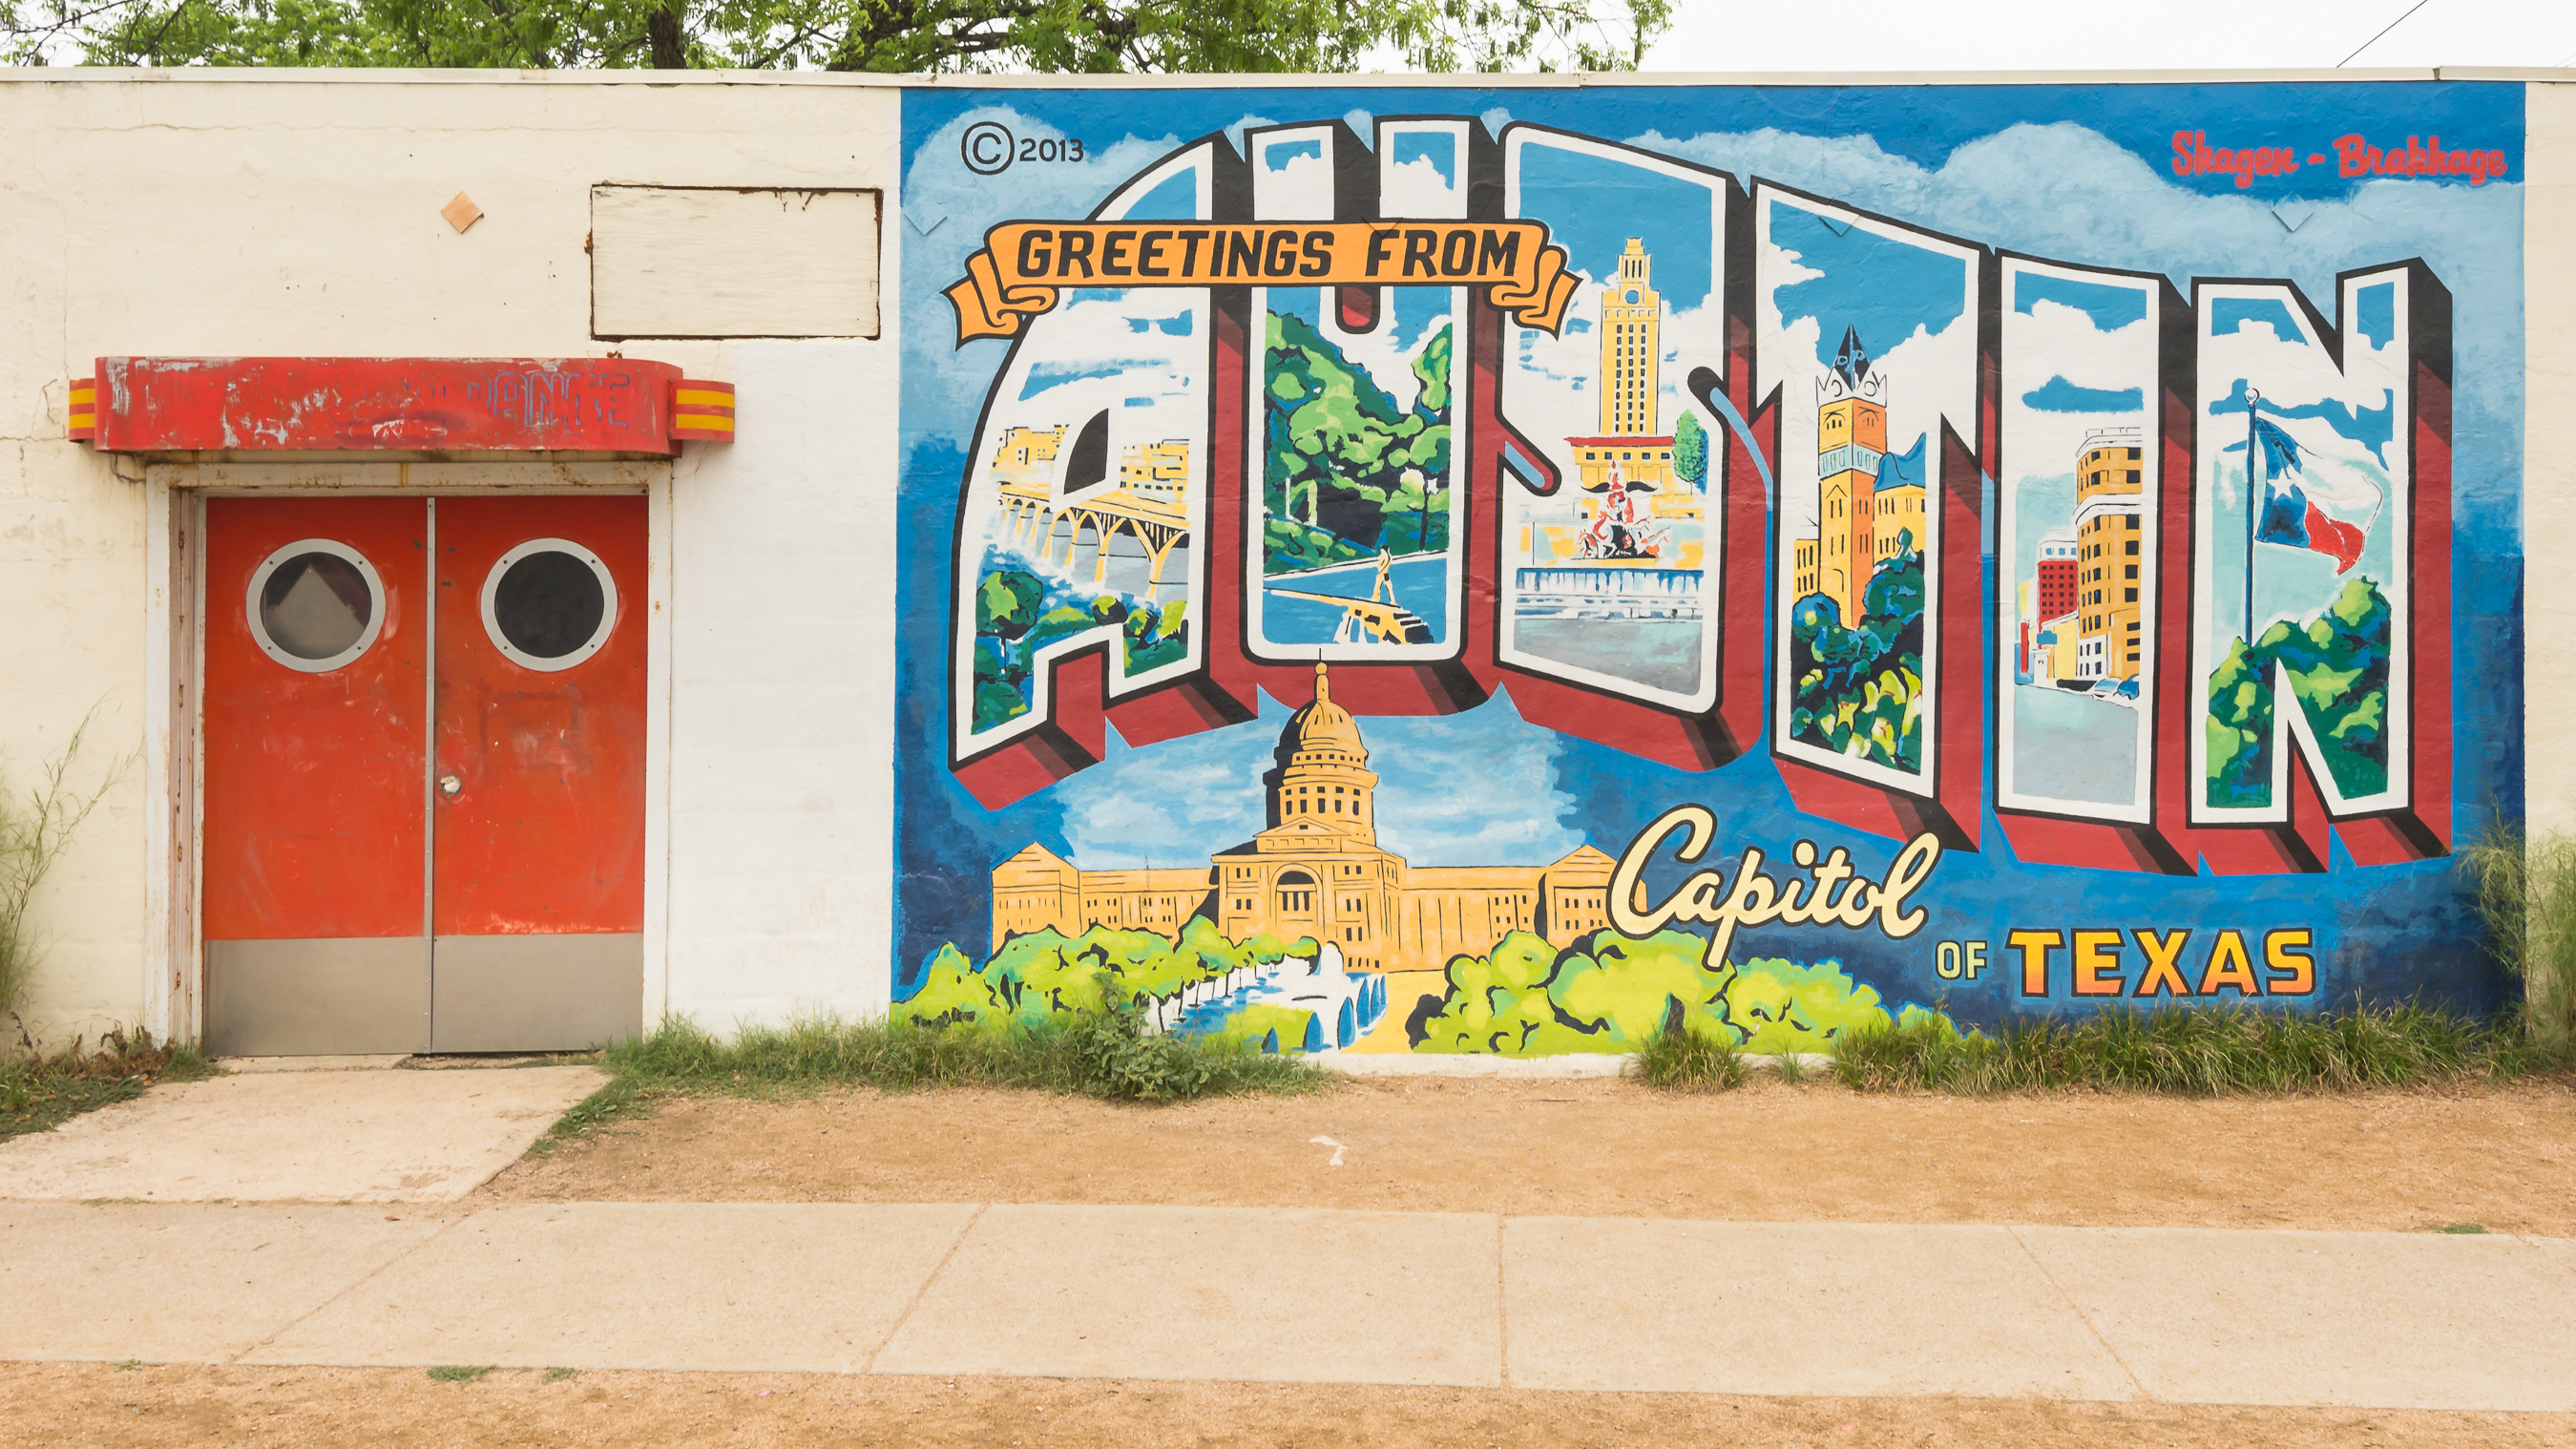 Inspired by a 1940s postcard, the vibrant mural depicts Austin landmarks like the Congress Avenue Bridge, The University of Texas Tower, and Barton Springs.